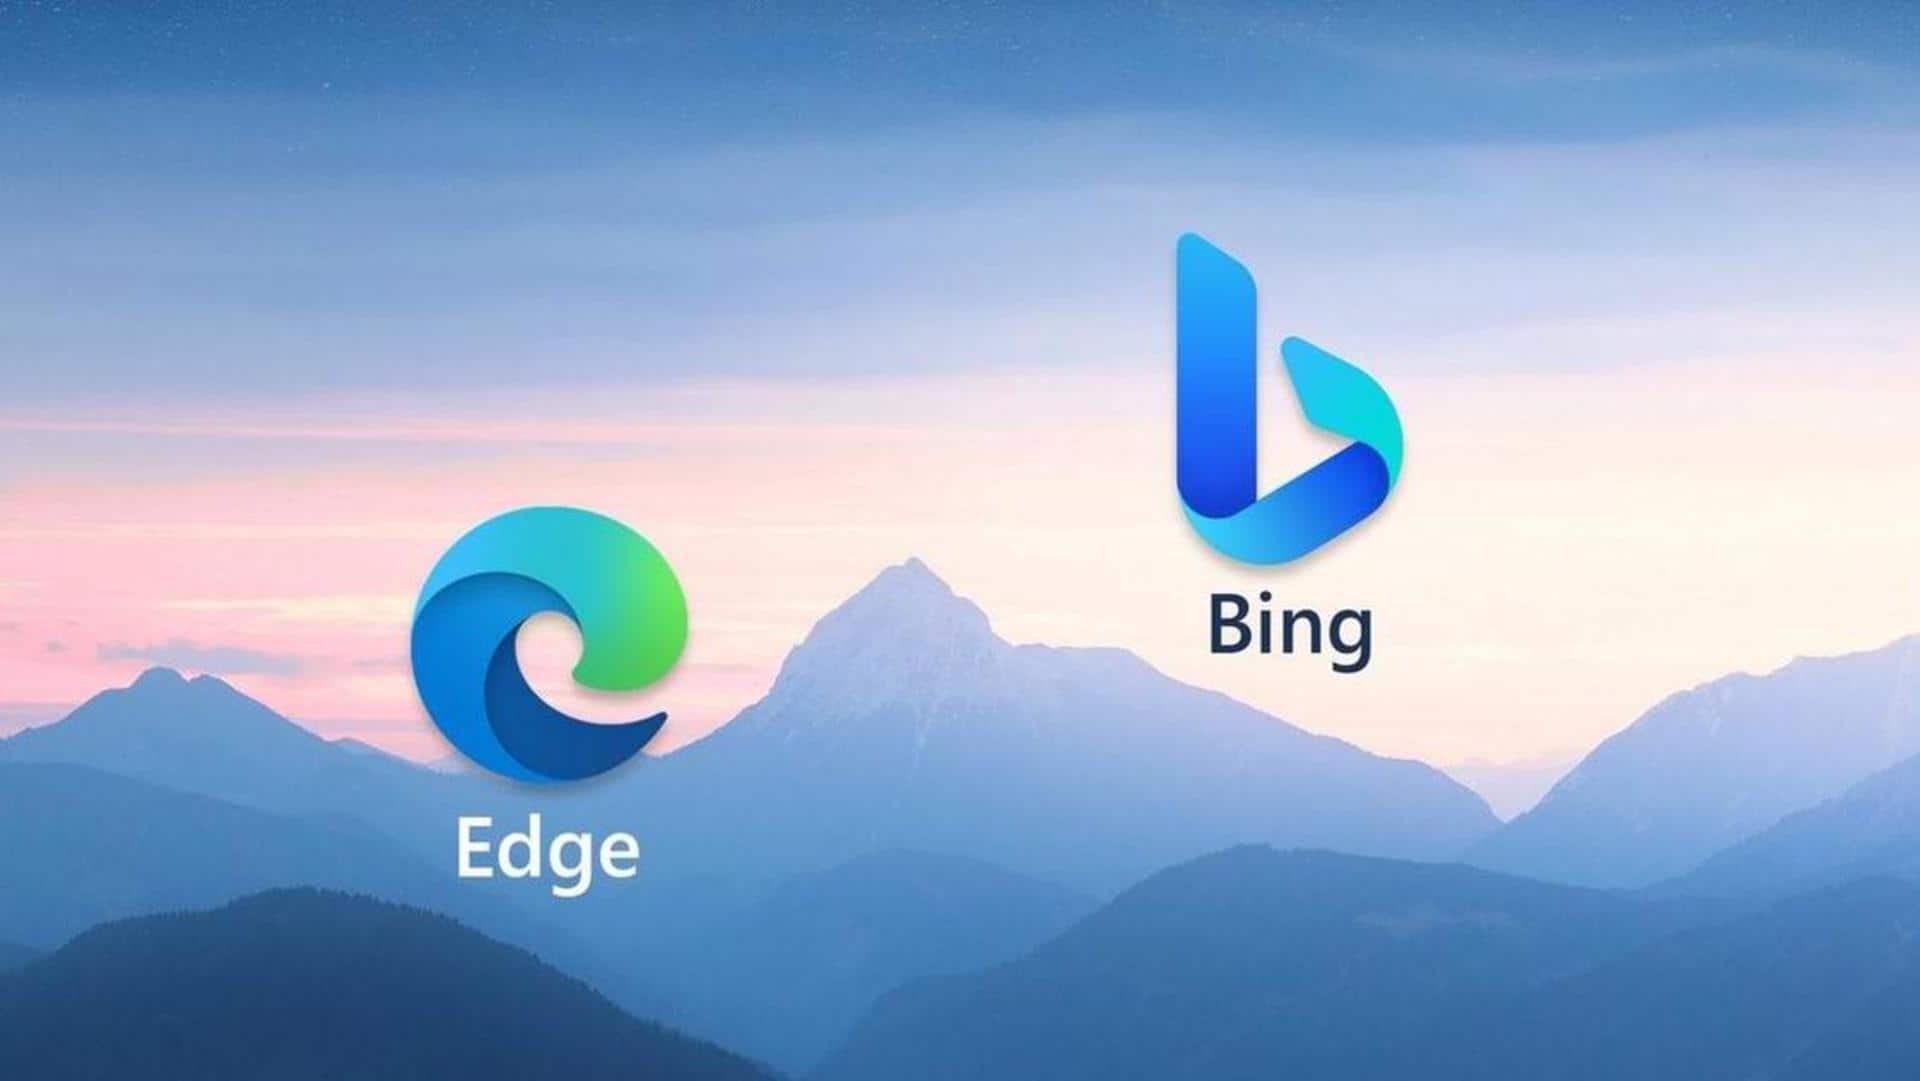 Microsoft's AI shopping tools in Bing, Edge: How to use